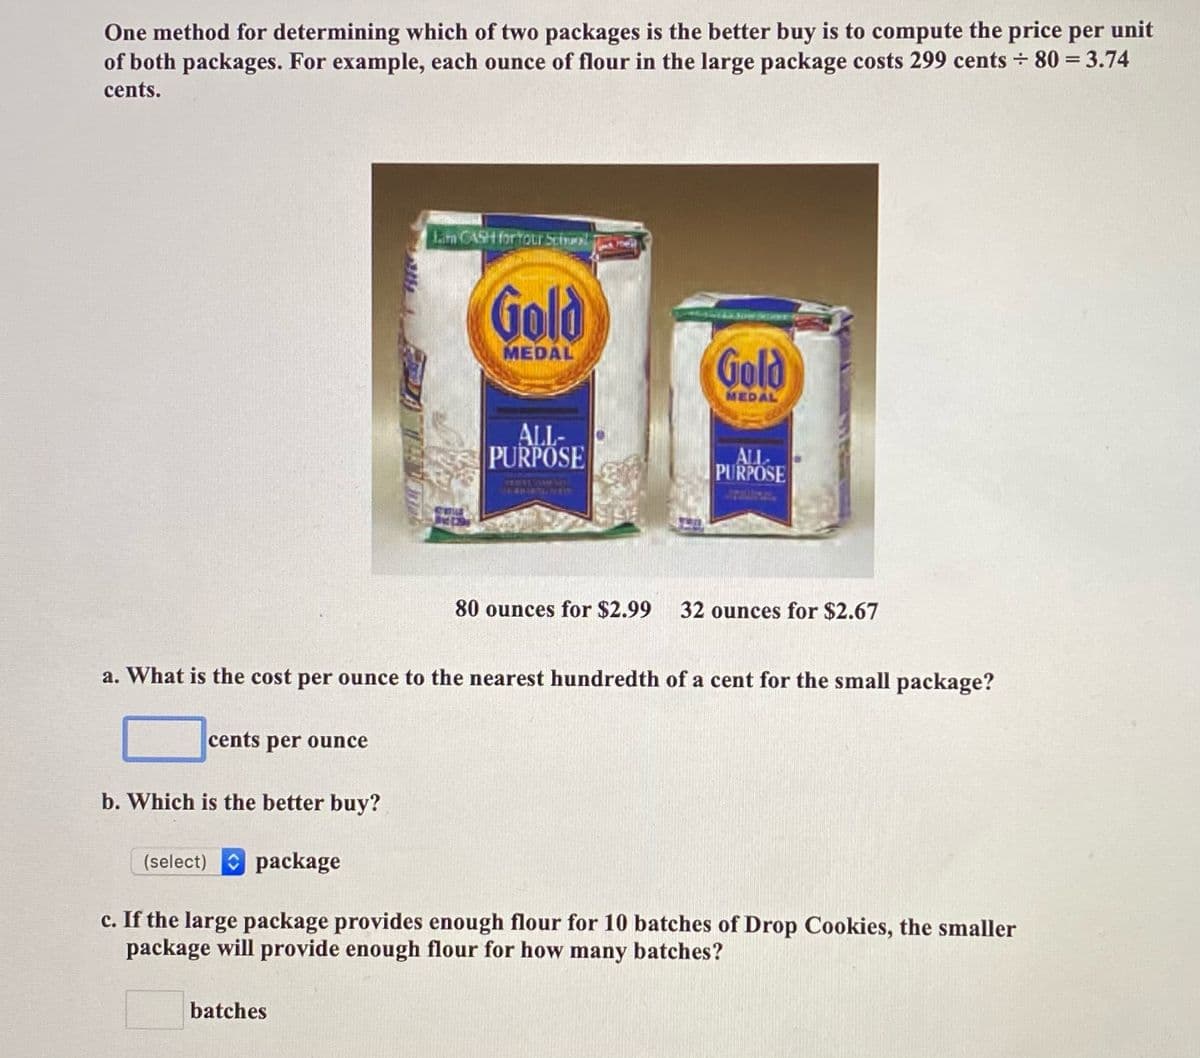 One method for determining which of two packages is the better buy is to compute the price per unit
of both packages. For example, each ounce of flour in the large package costs 299 cents 80 = 3.74
cents.
Lam CASH for tour Scinol
Poe
Gold
MEDAL
Gold
MEDAL
ALL-
PURPOSE
ALL
PURPOSE
80 ounces for $2.99
32 ounces for $2.67
a. What is the cost per ounce to the nearest hundredth of a cent for the small package?
cents per ounce
b. Which is the better buy?
(select) package
c. If the large package provides enough flour for 10 batches of Drop Cookies, the smaller
package will provide enough flour for how many batches?
batches
